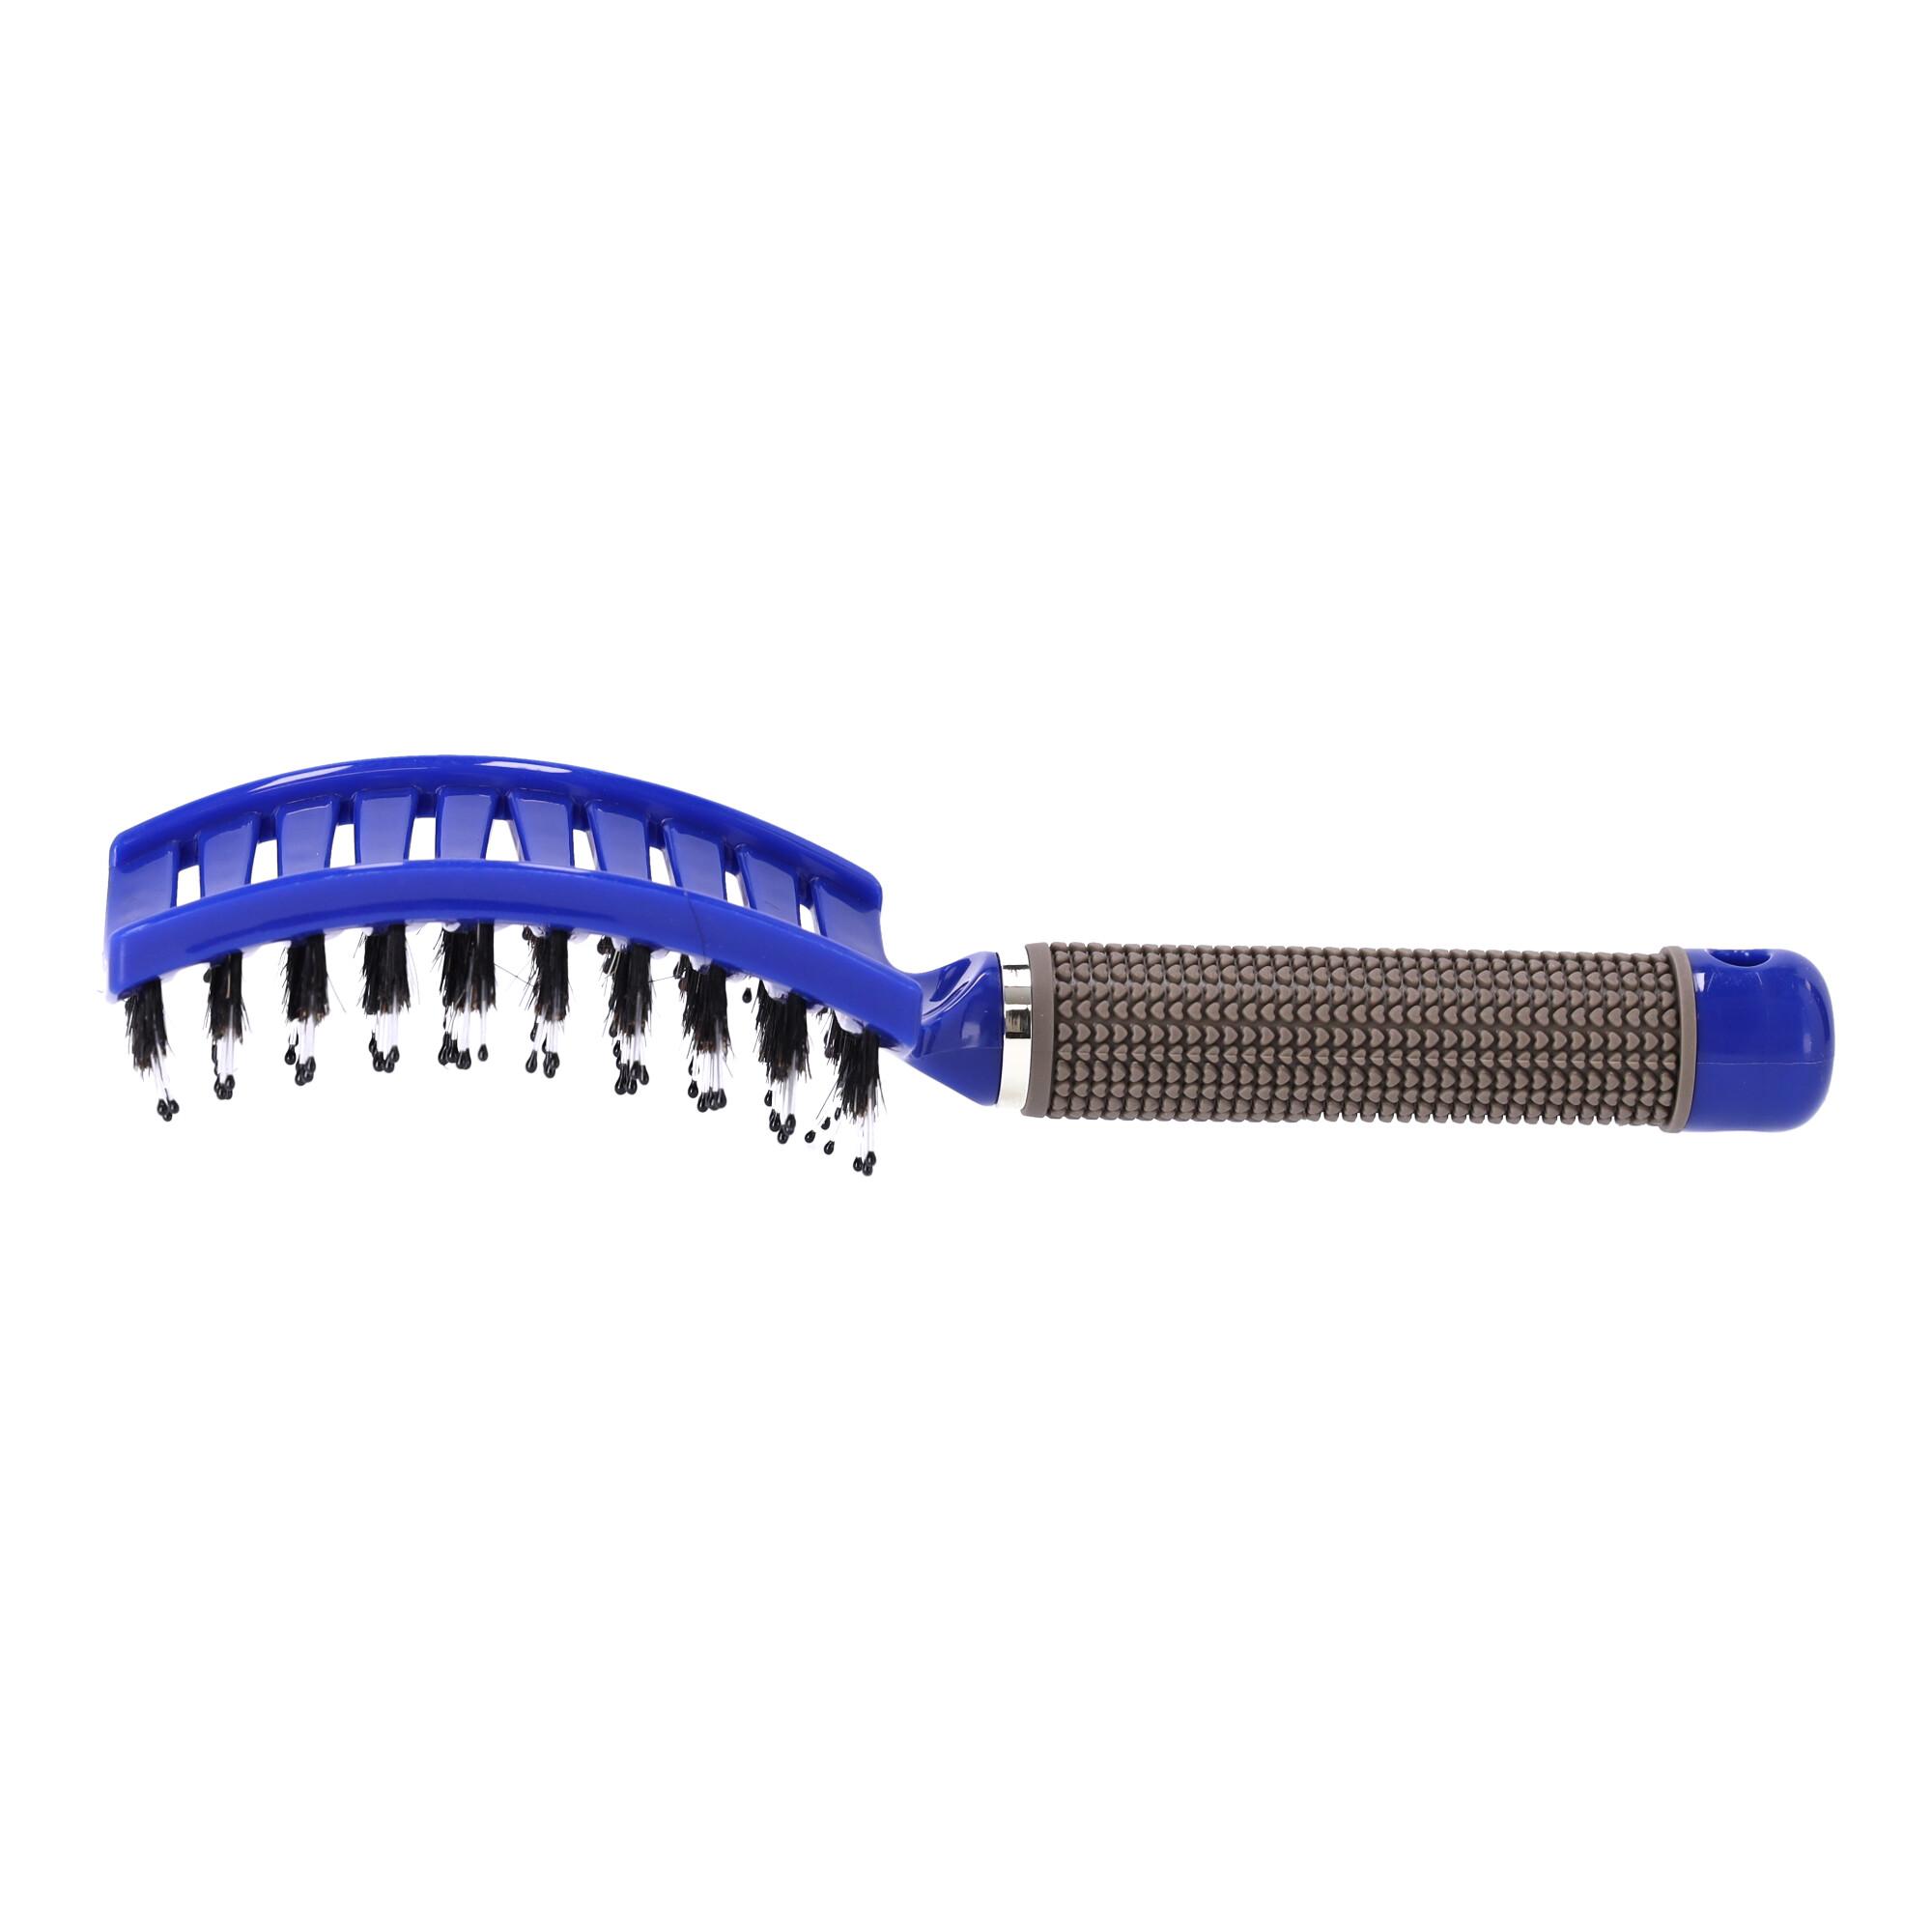 Profiled hair brush with boar bristles - blue